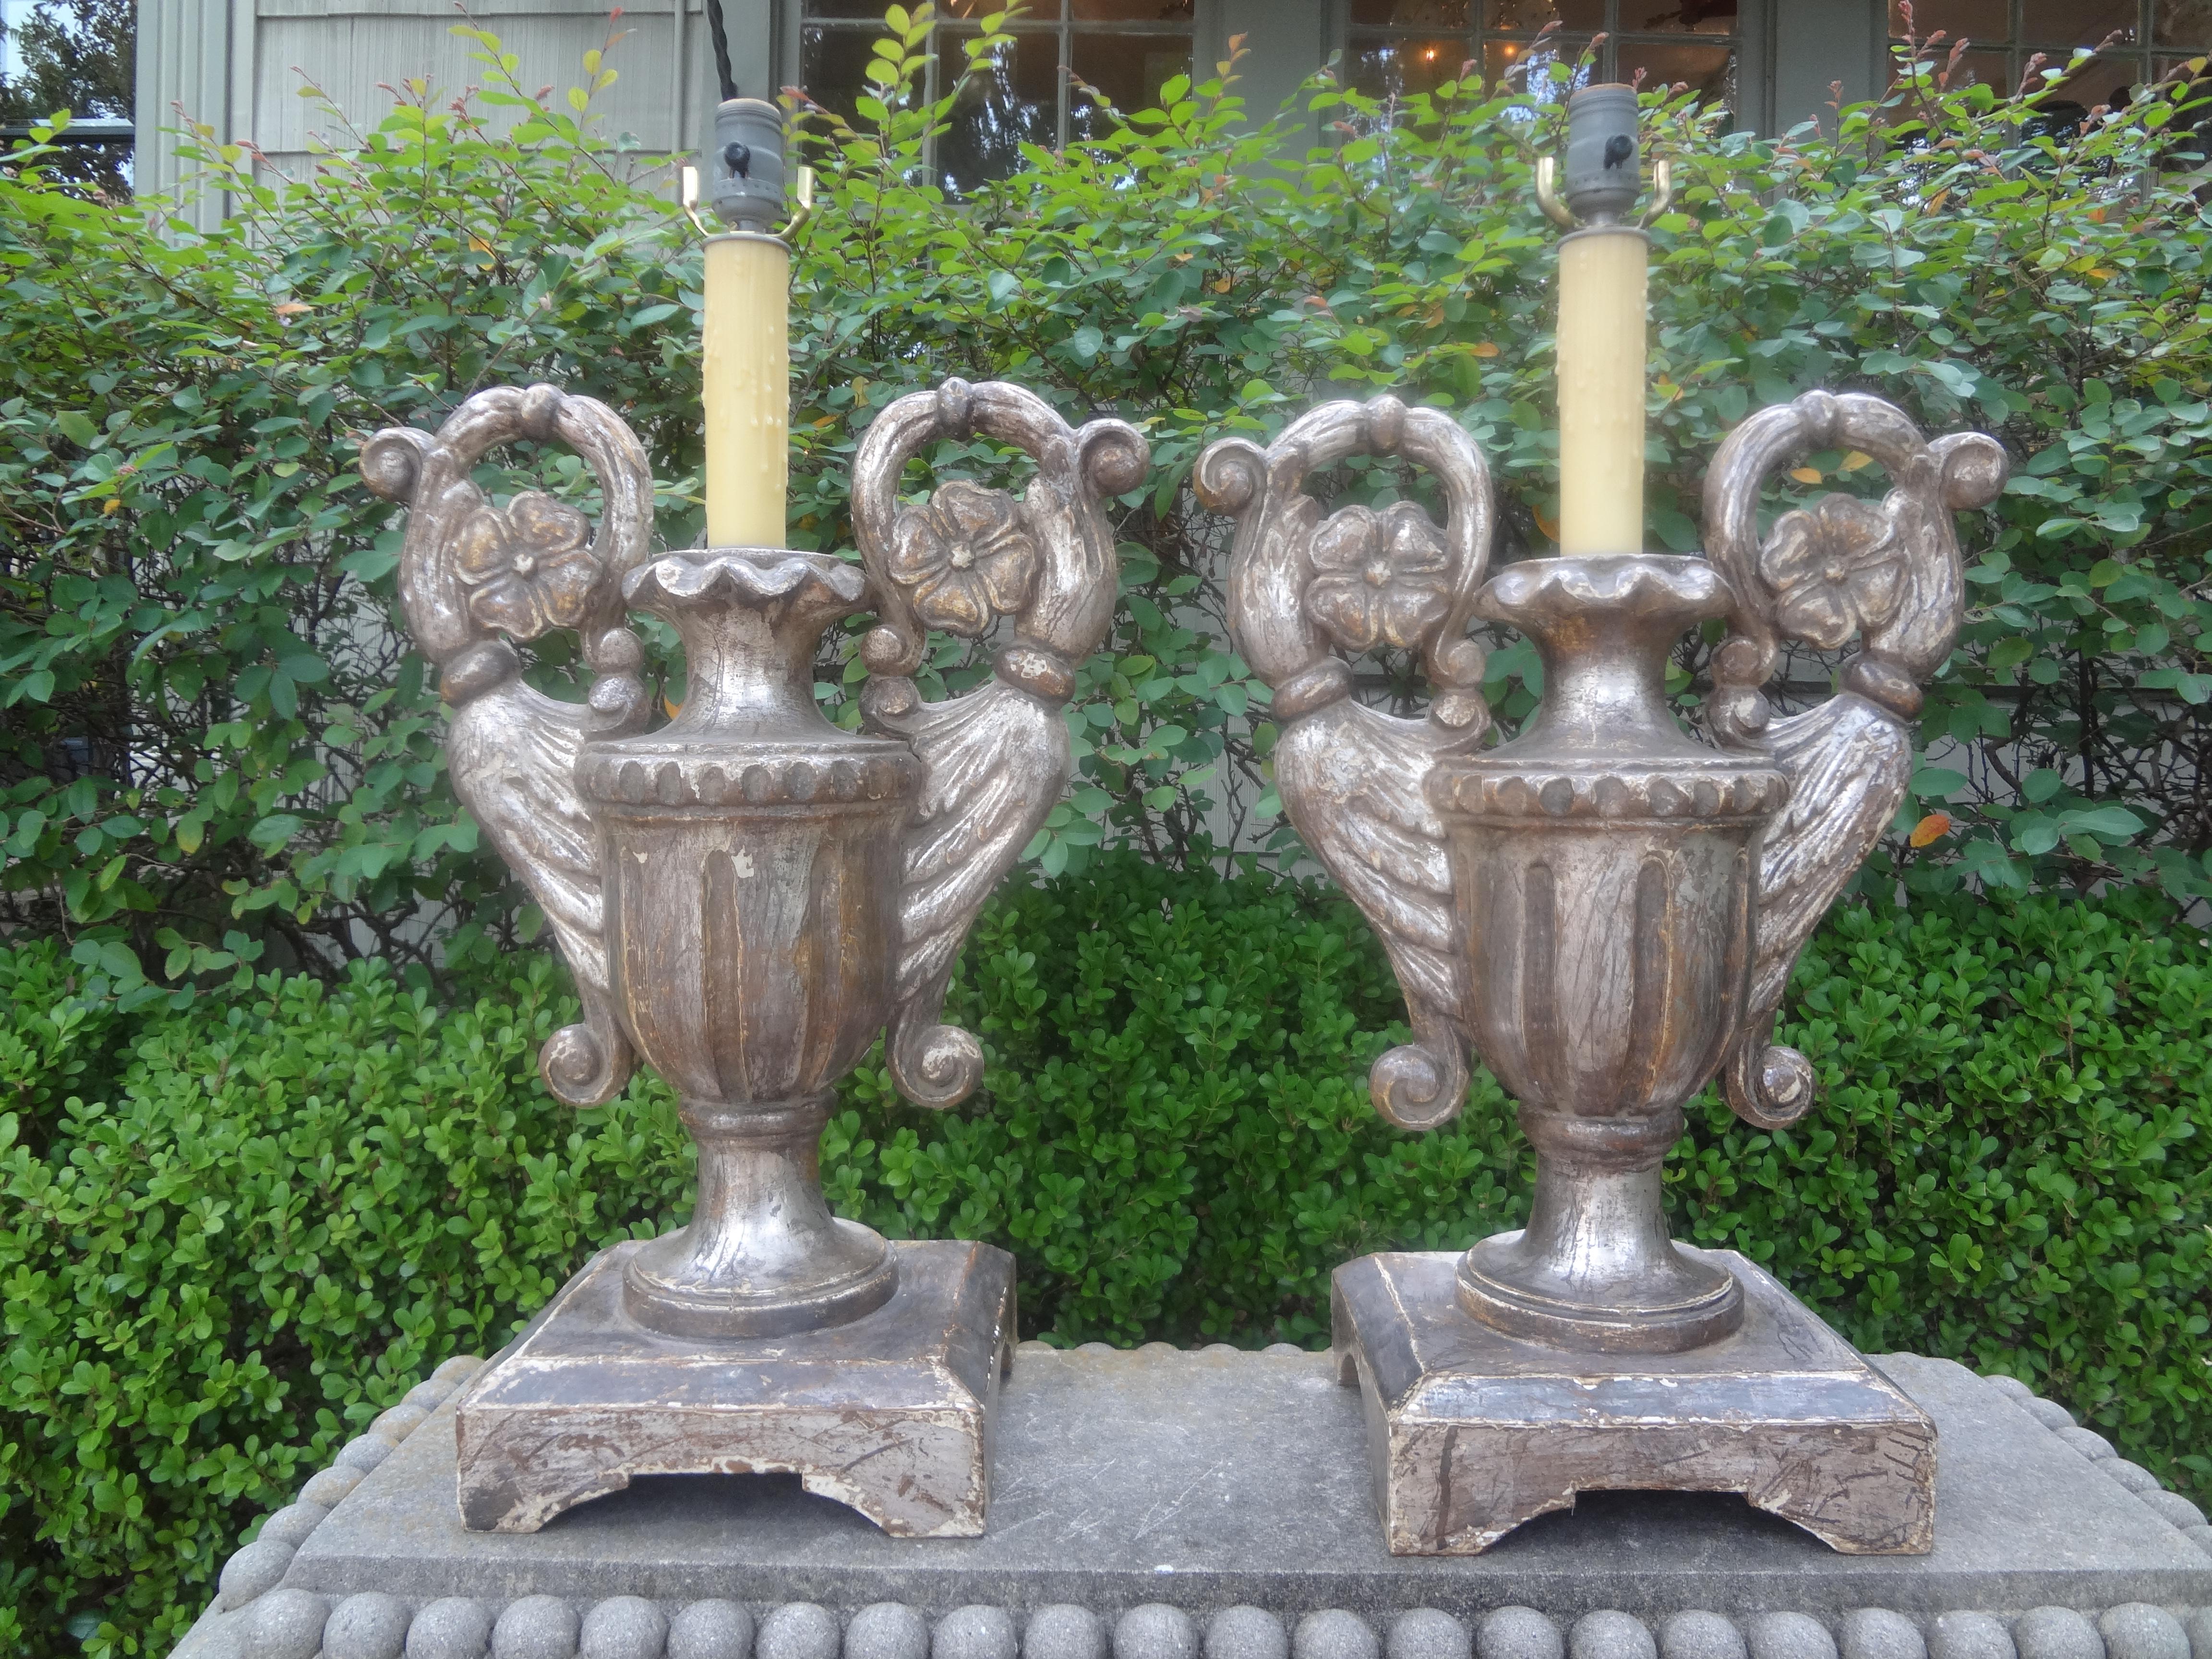 Pair Of 18th Century Italian Silver Giltwood Lamps.
Stunning pair of 18th century Italian Neoclassical style silver gilt wood urns with handles converted into table lamps. These chic lamps are from the Tuscany region of Italy and have been newly